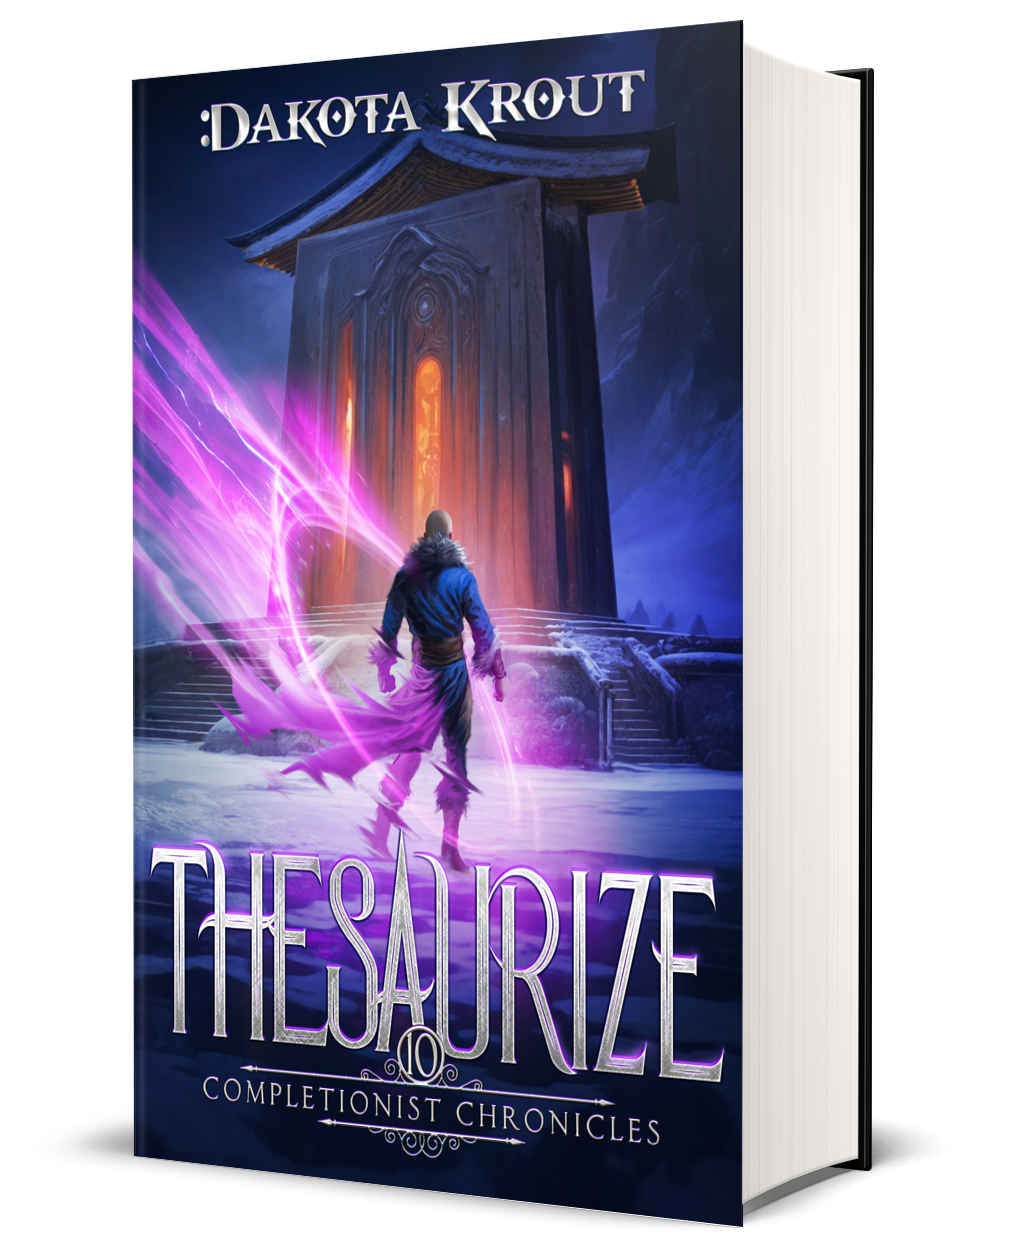 Thesaurize Signed Hardcover